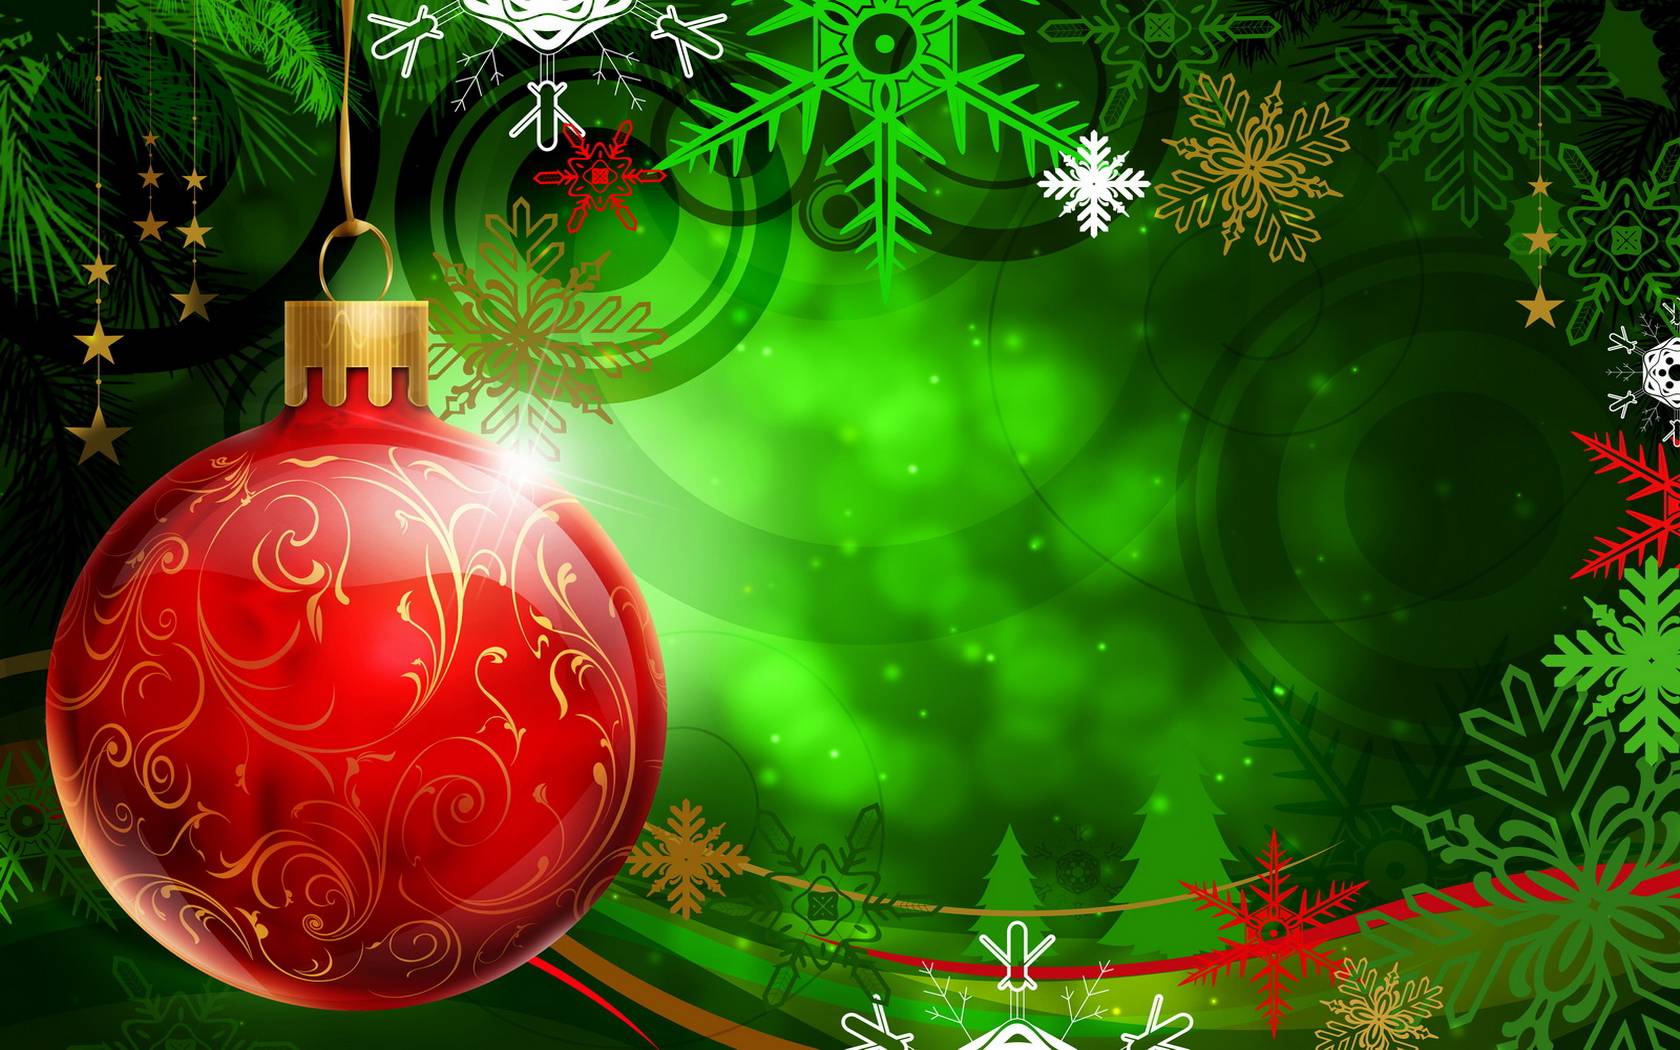 High Resolution Christmas Desktop Backgrounds | Wallpapers Records